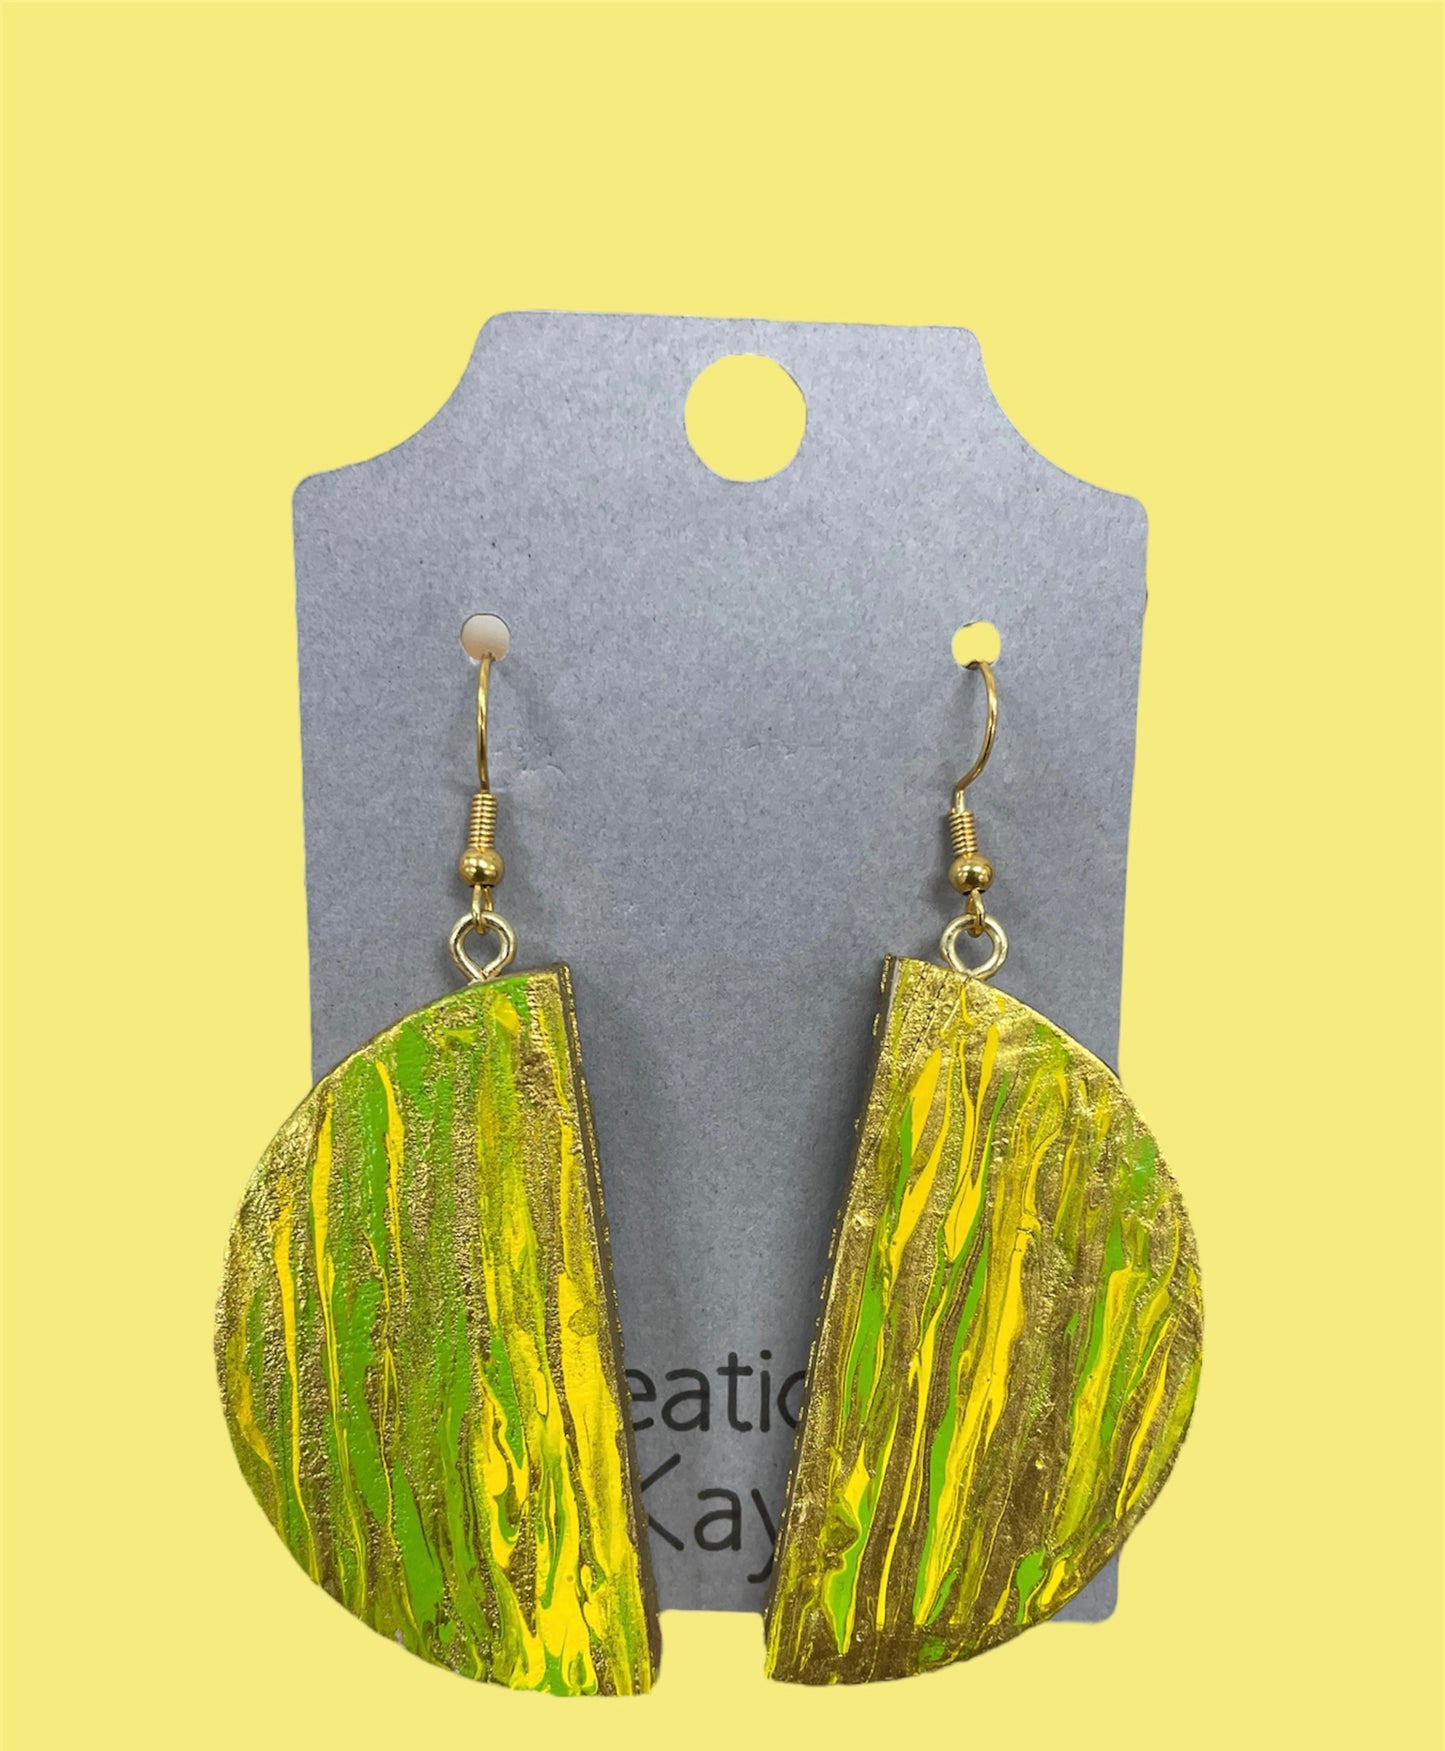 # 237 Green, yellow, and gold painted half circle earrings